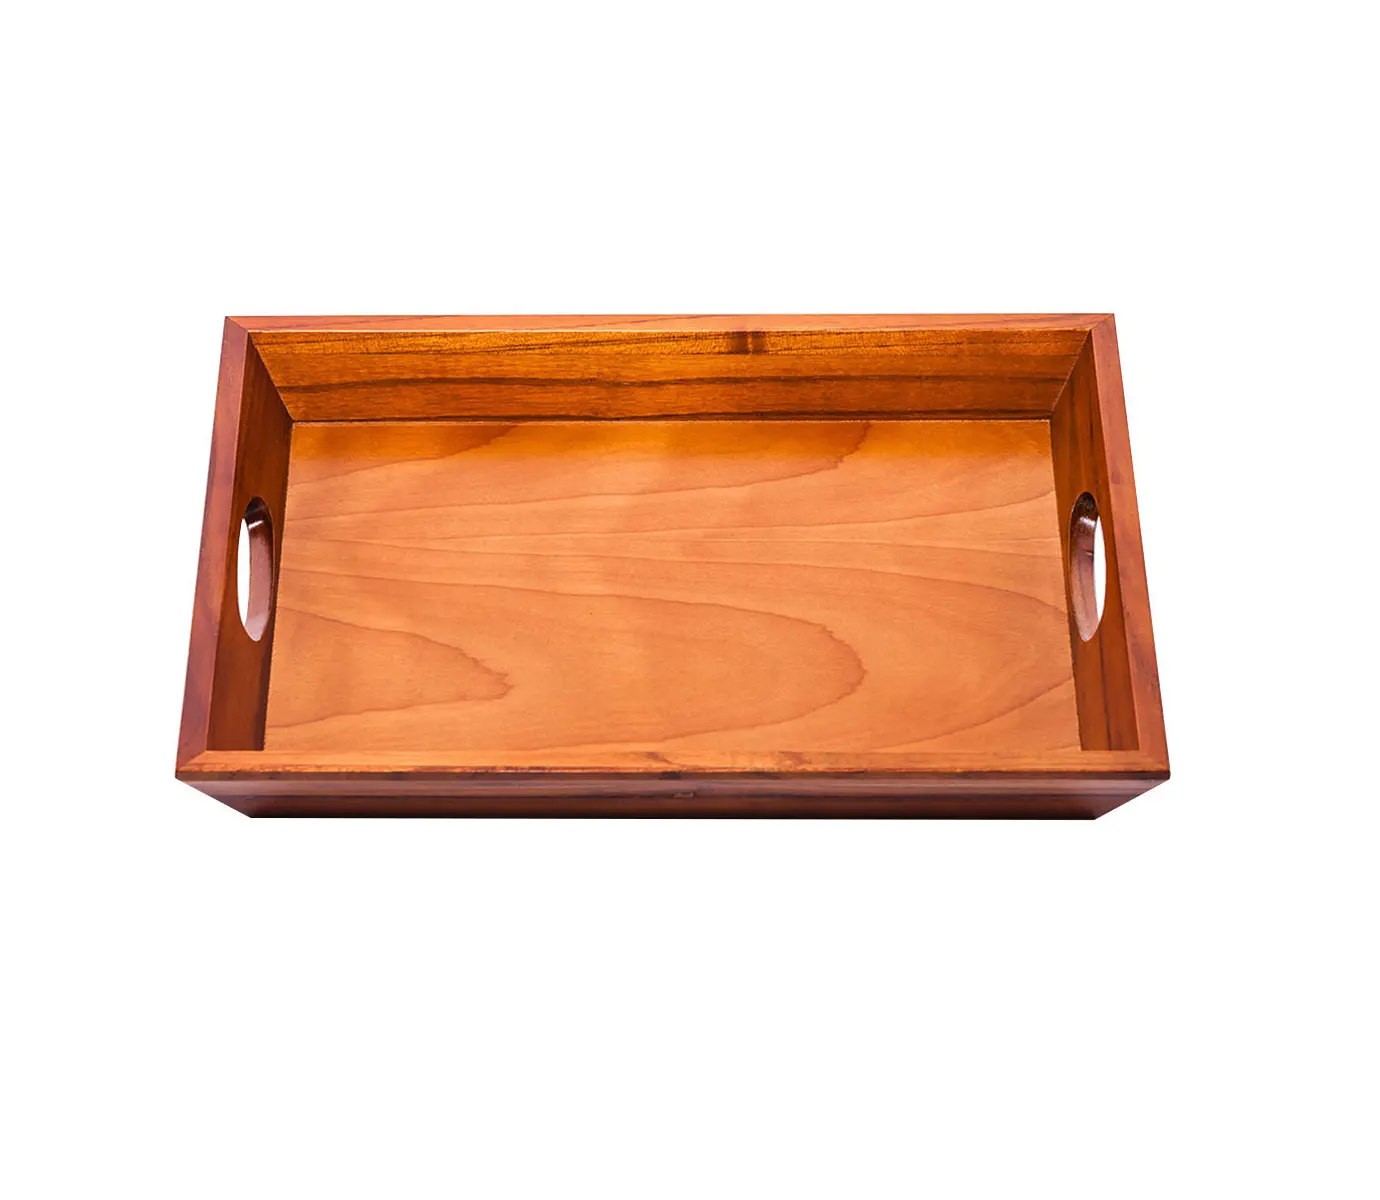 Trending Design Wood Food Serving Tray Finest Quality Rectangular Shape Tea Coffee Serving Tray At Cheapest Price